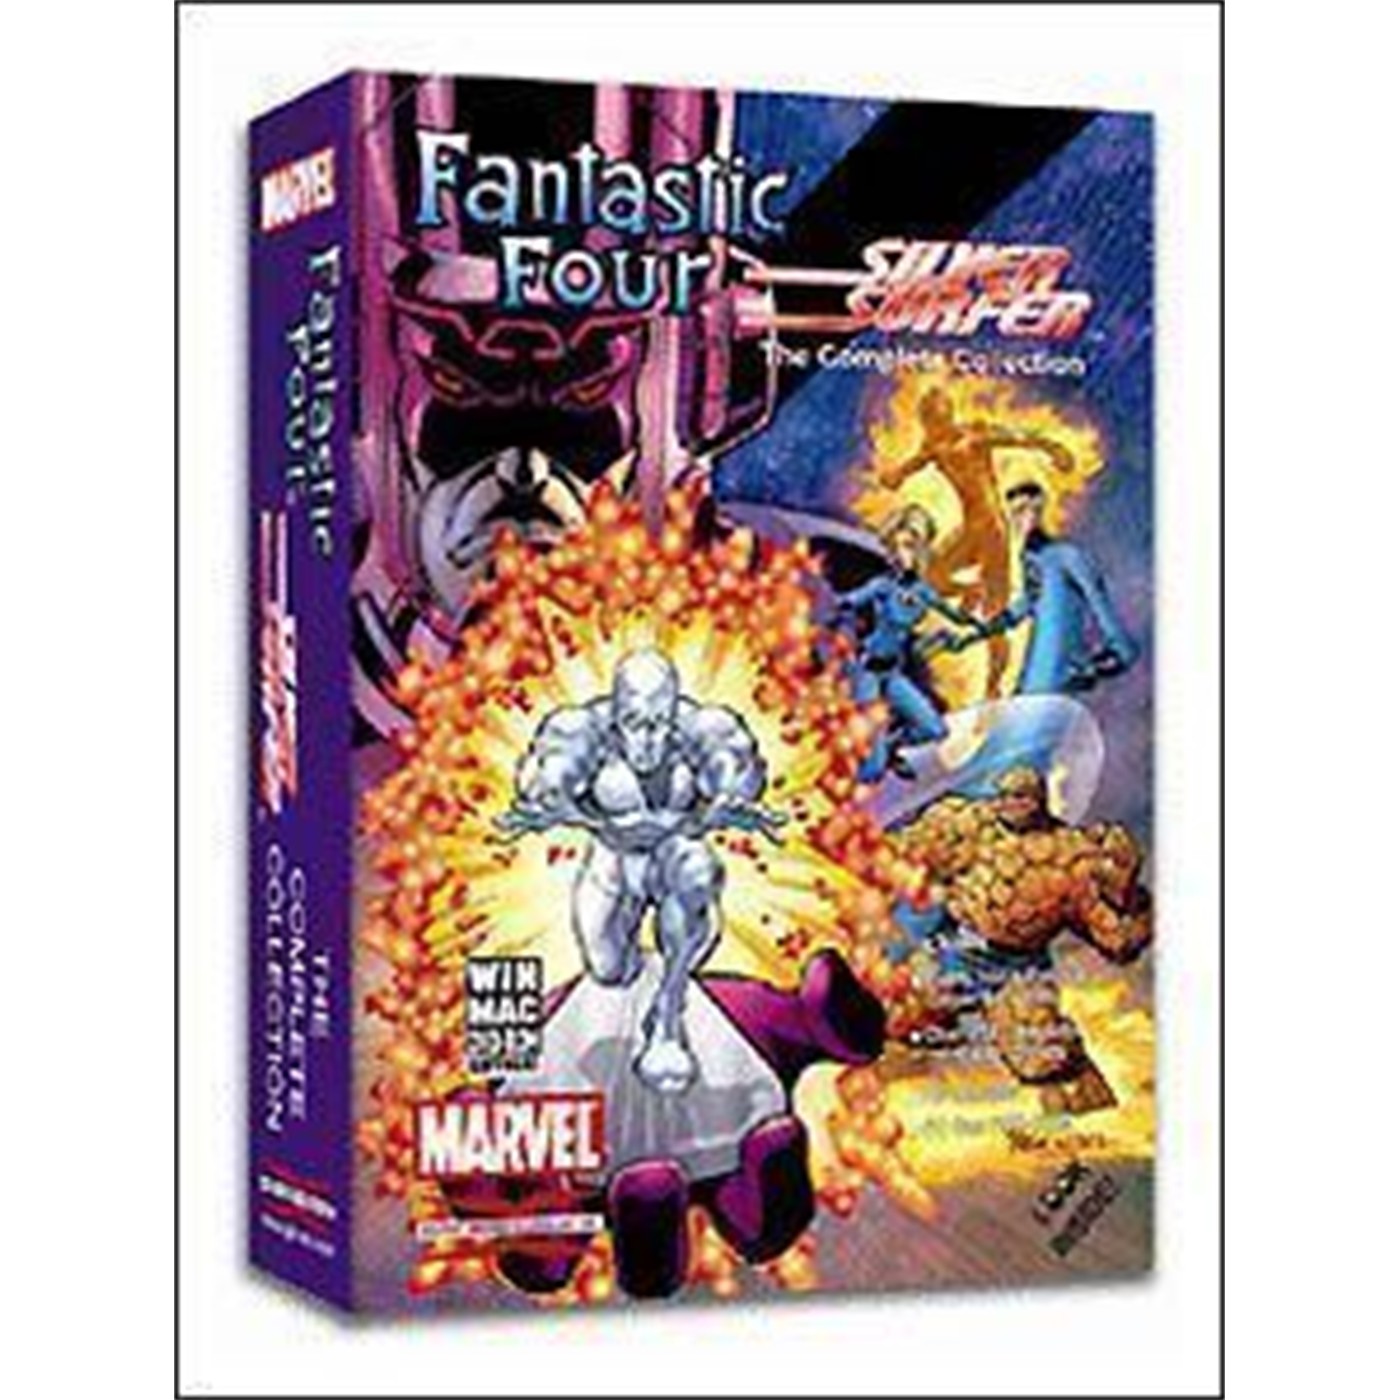 Silver Surfer and Fantastic Four DVD-ROM